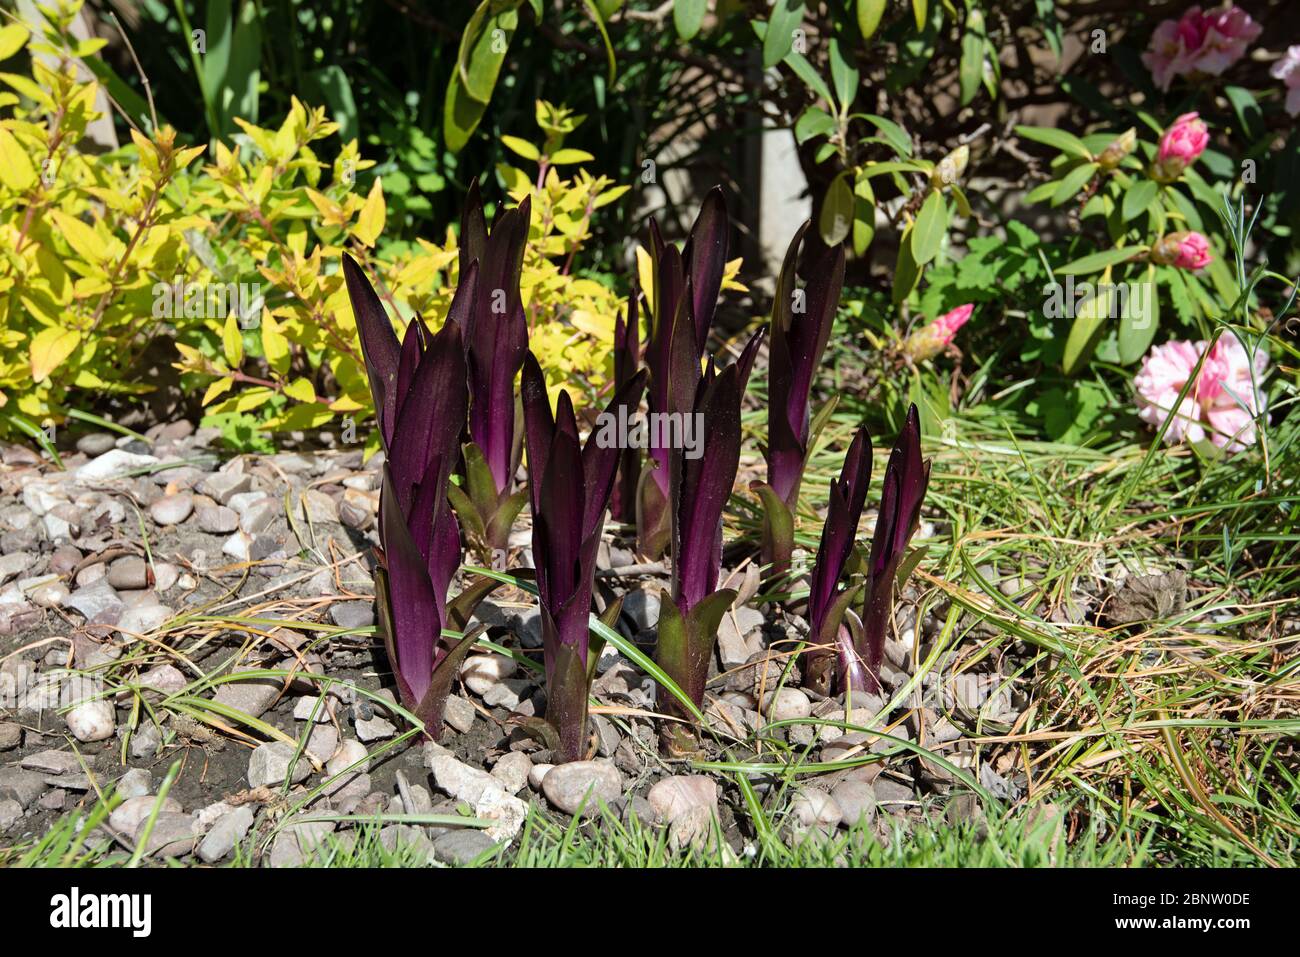 The stunning new leaves of Eucomis comosa Sparkling Burgundy Stock Photo